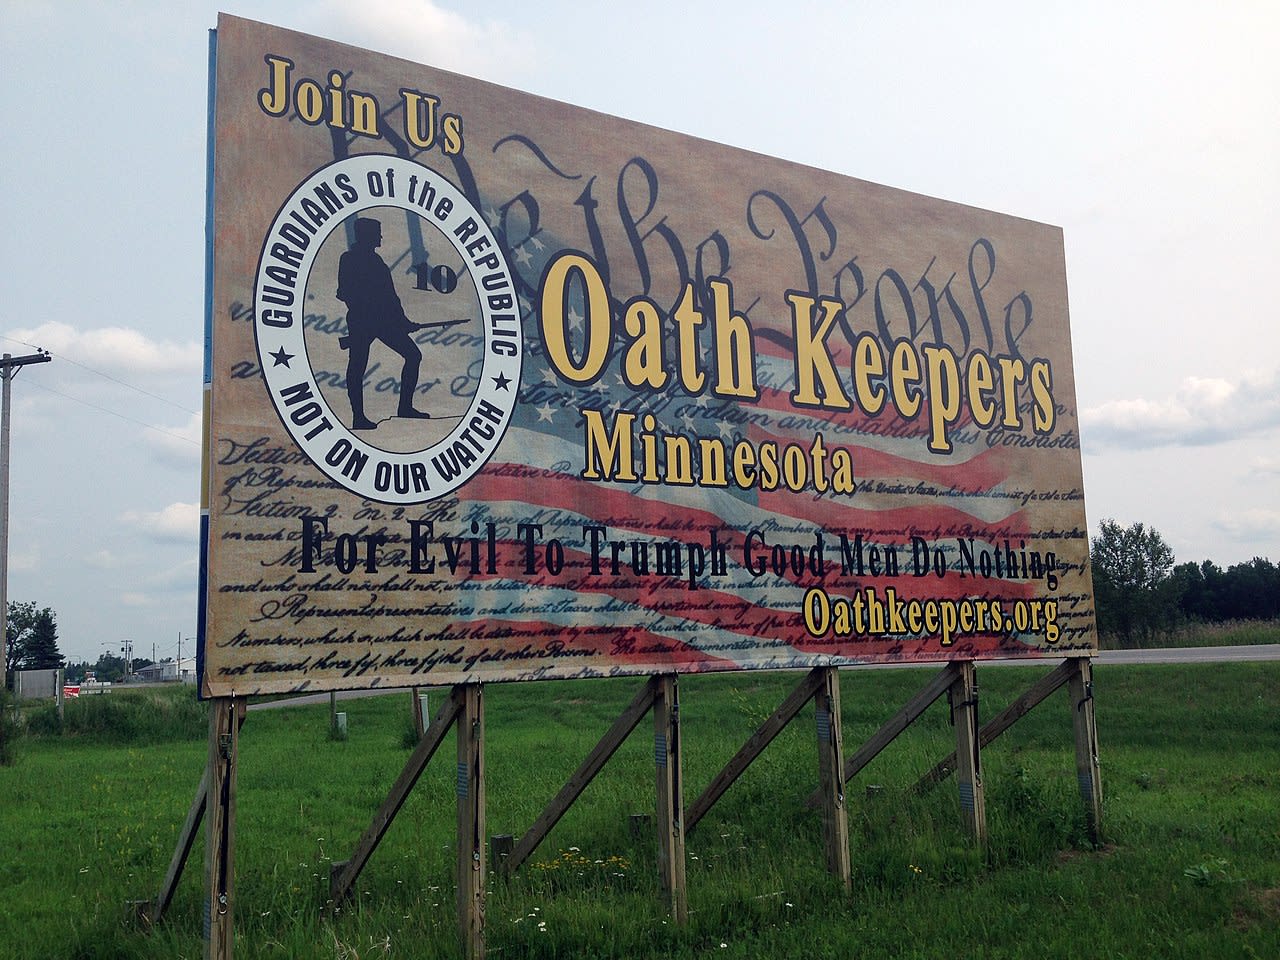 Oath Keepers recruitment sign.